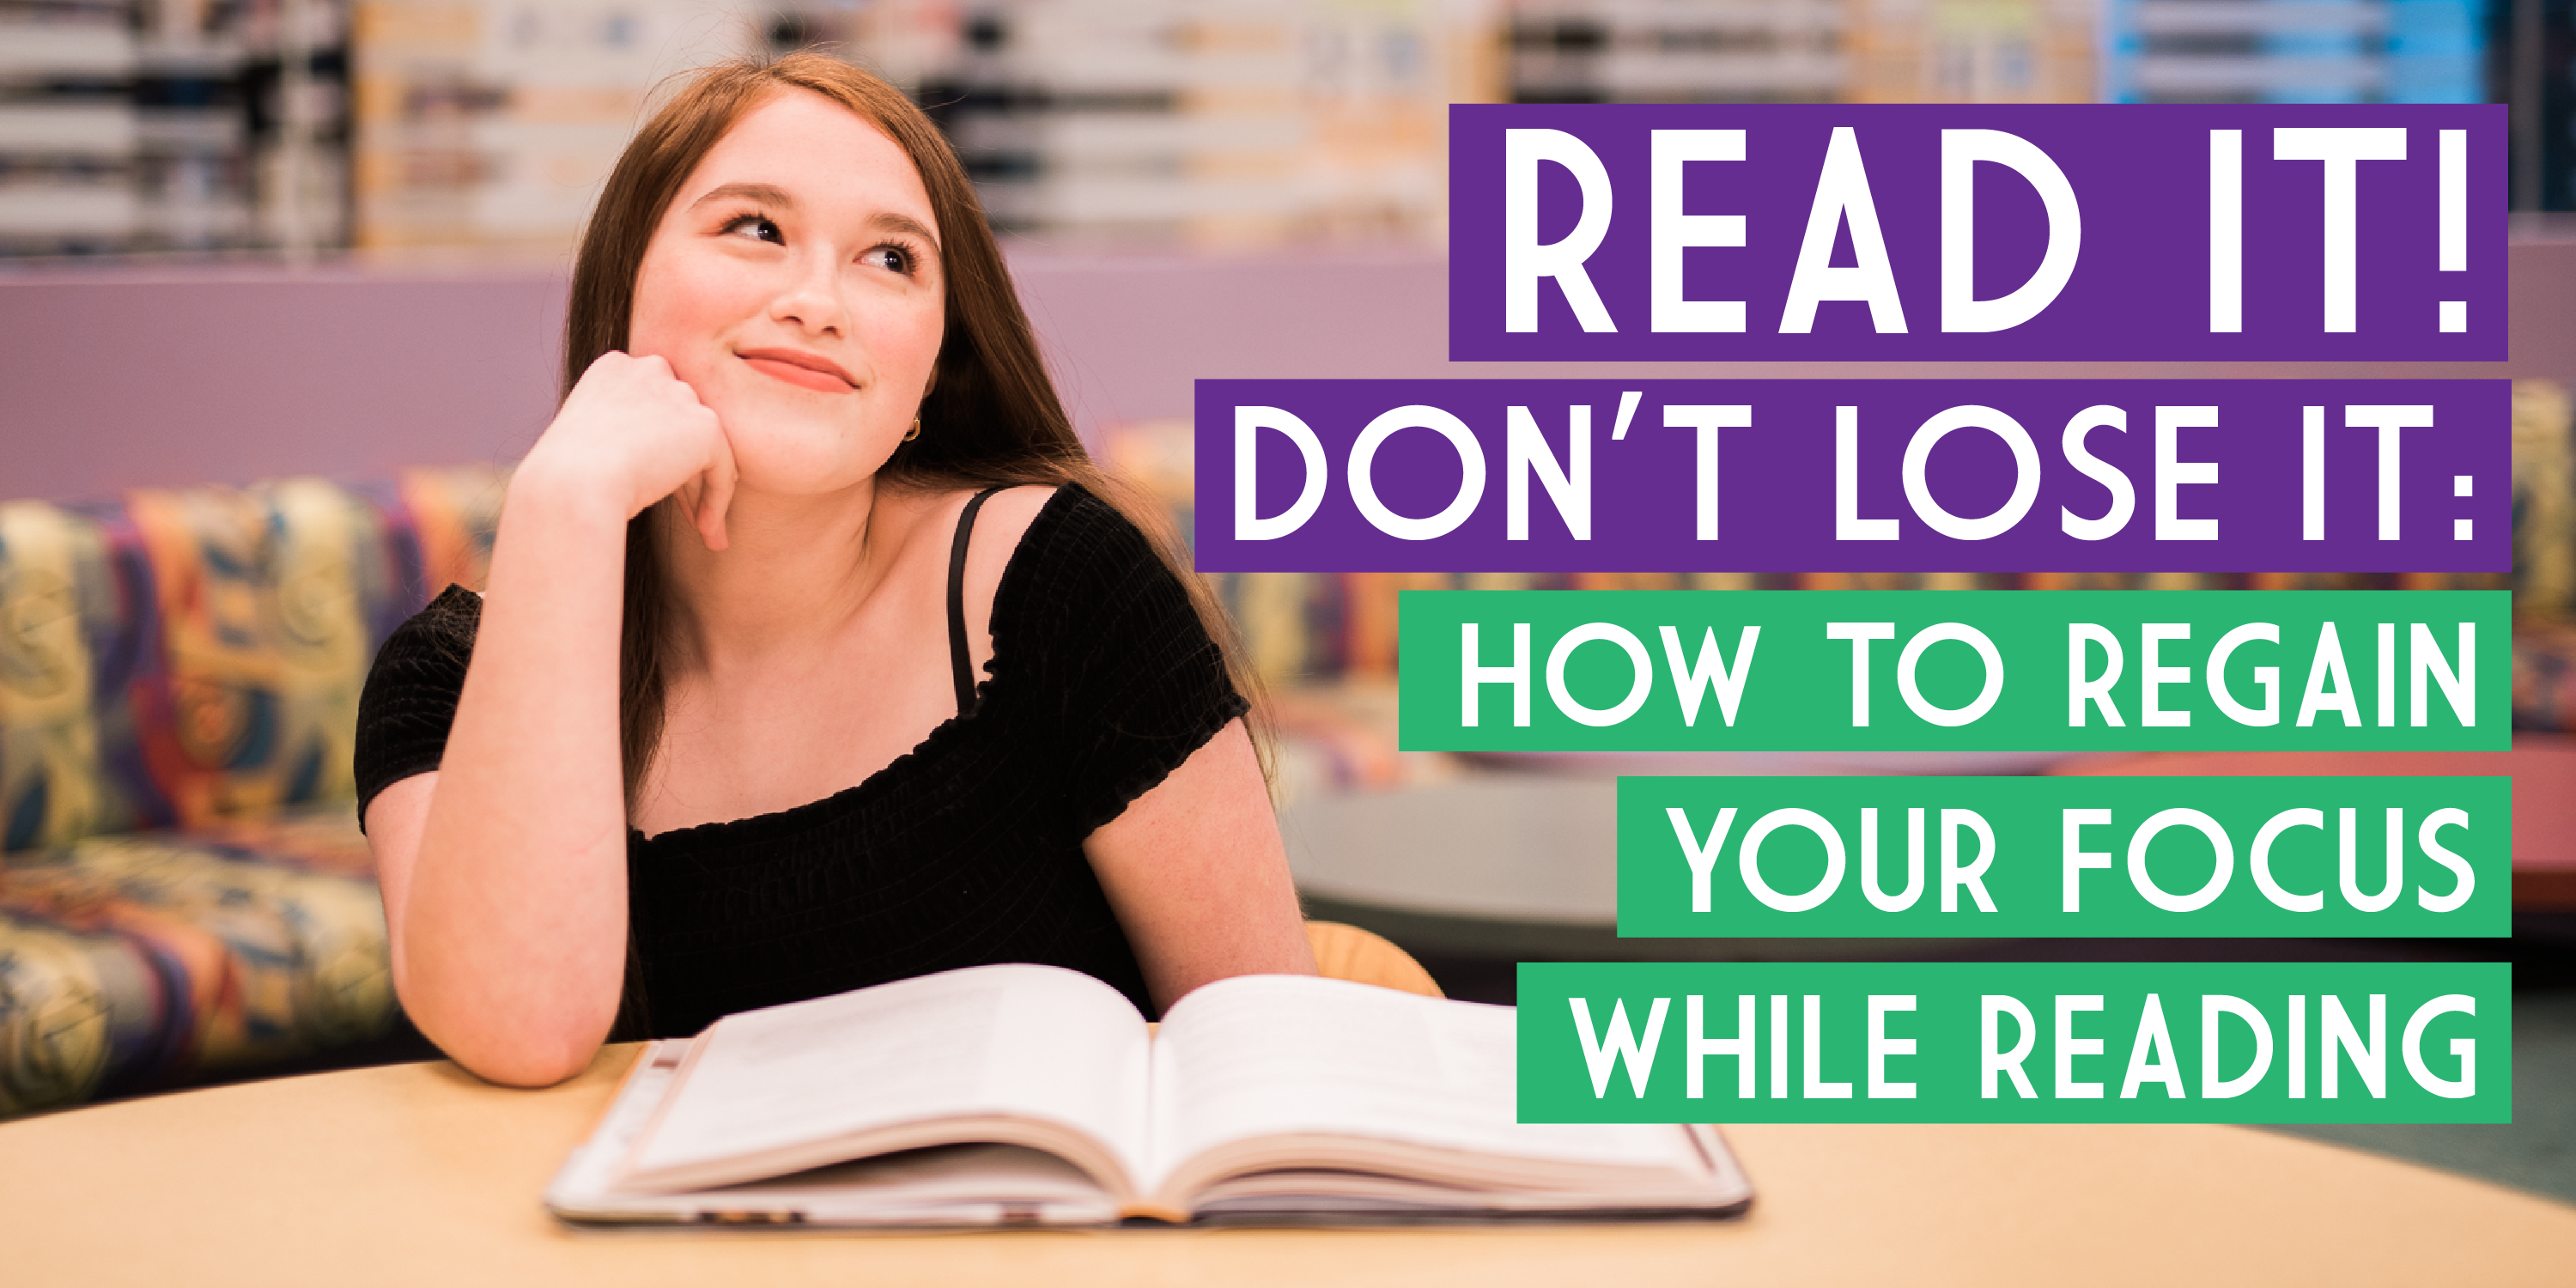 Read It! Don't Lose It: How to Regain Your Focus While Reading